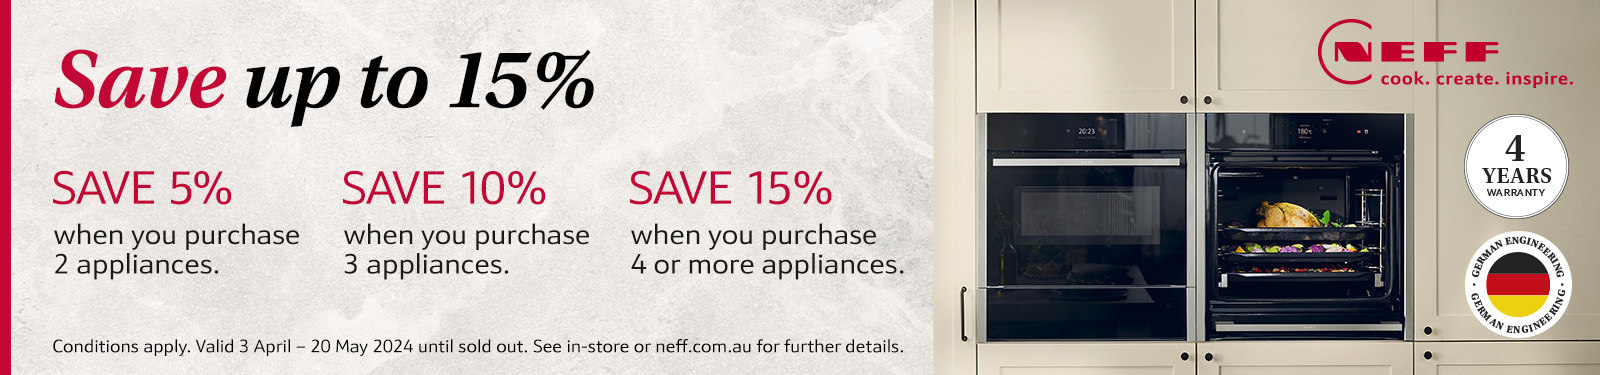 Save Up To 15% When you Purchase 4 Or More Neff Appliances at Retravision